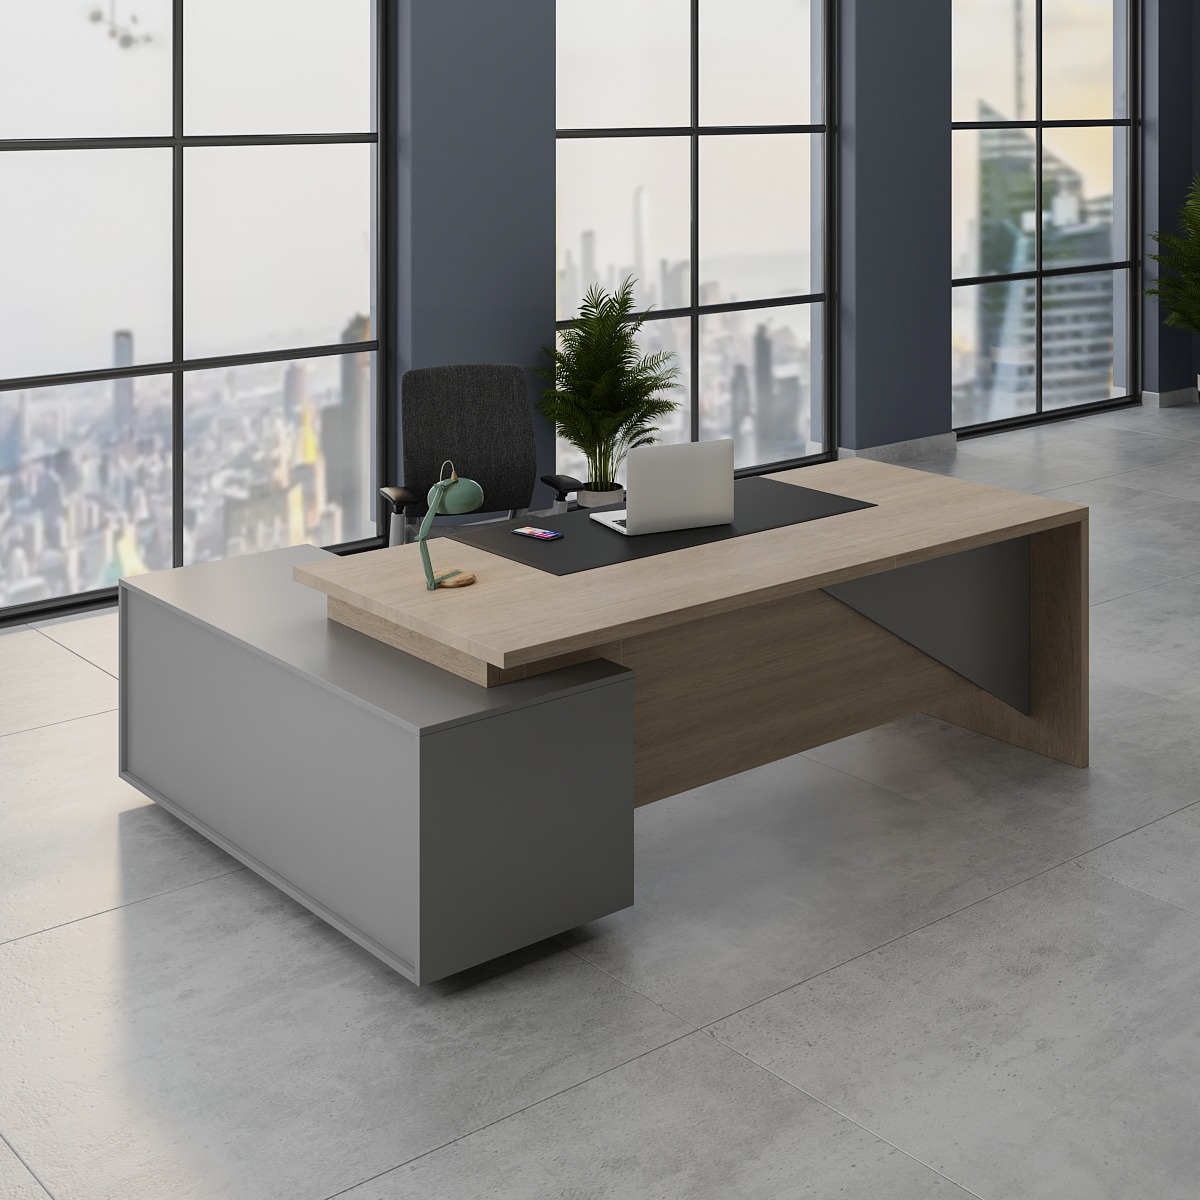 How To Choose The Perfect Desk For You: A blog about types of desks and how you can use them to enhance your workplace